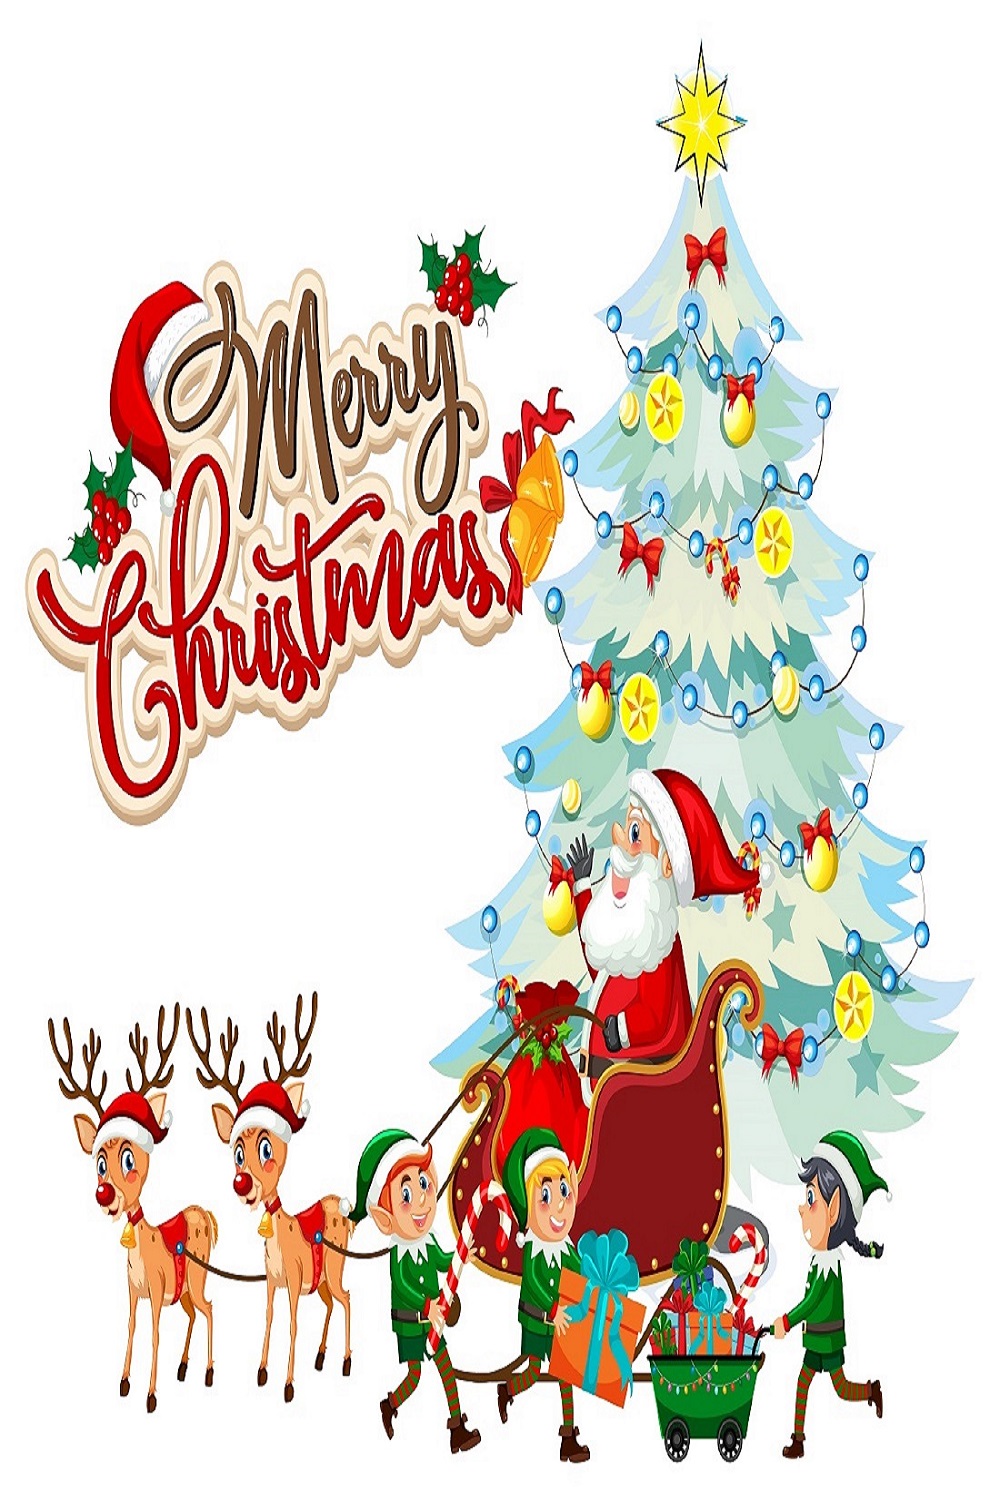 Merry Christmas text with cartoon character pinterest preview image.